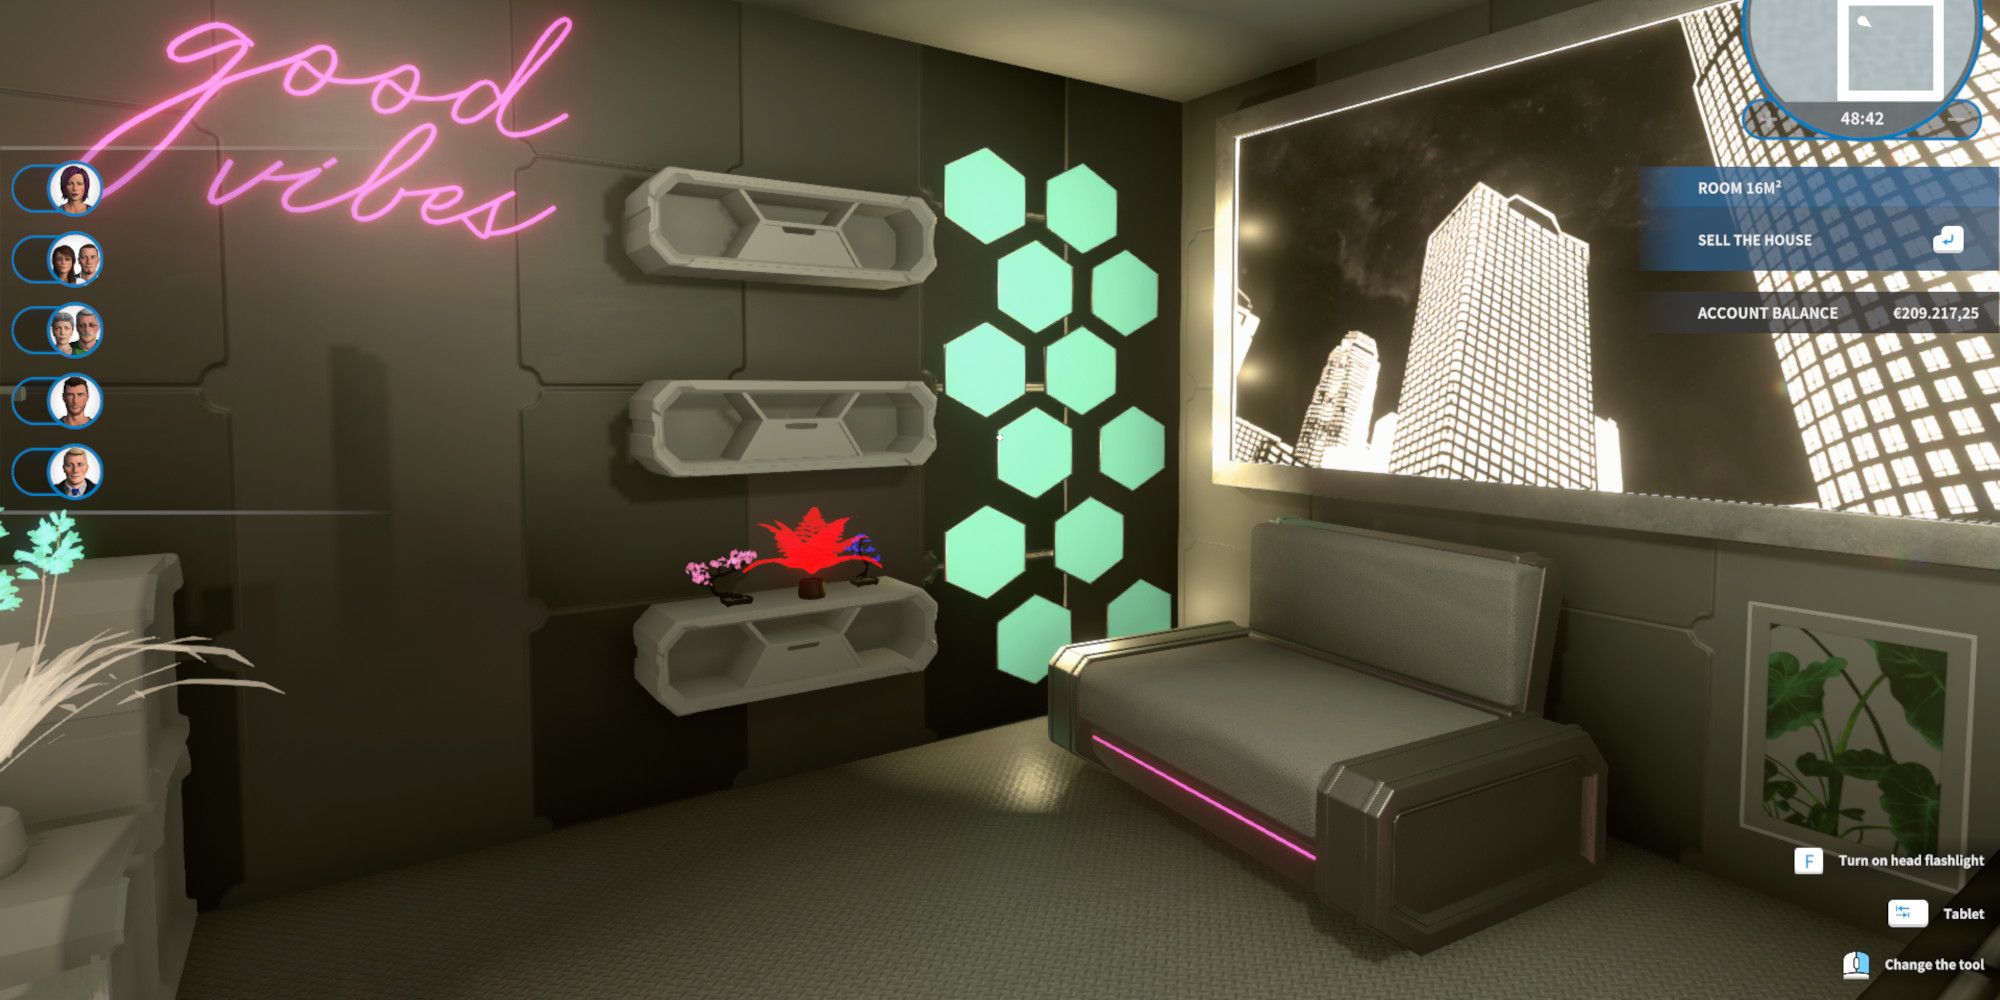 One of the cyberpunk apartments to flip in the Cyberpunk DLC for House Flipper